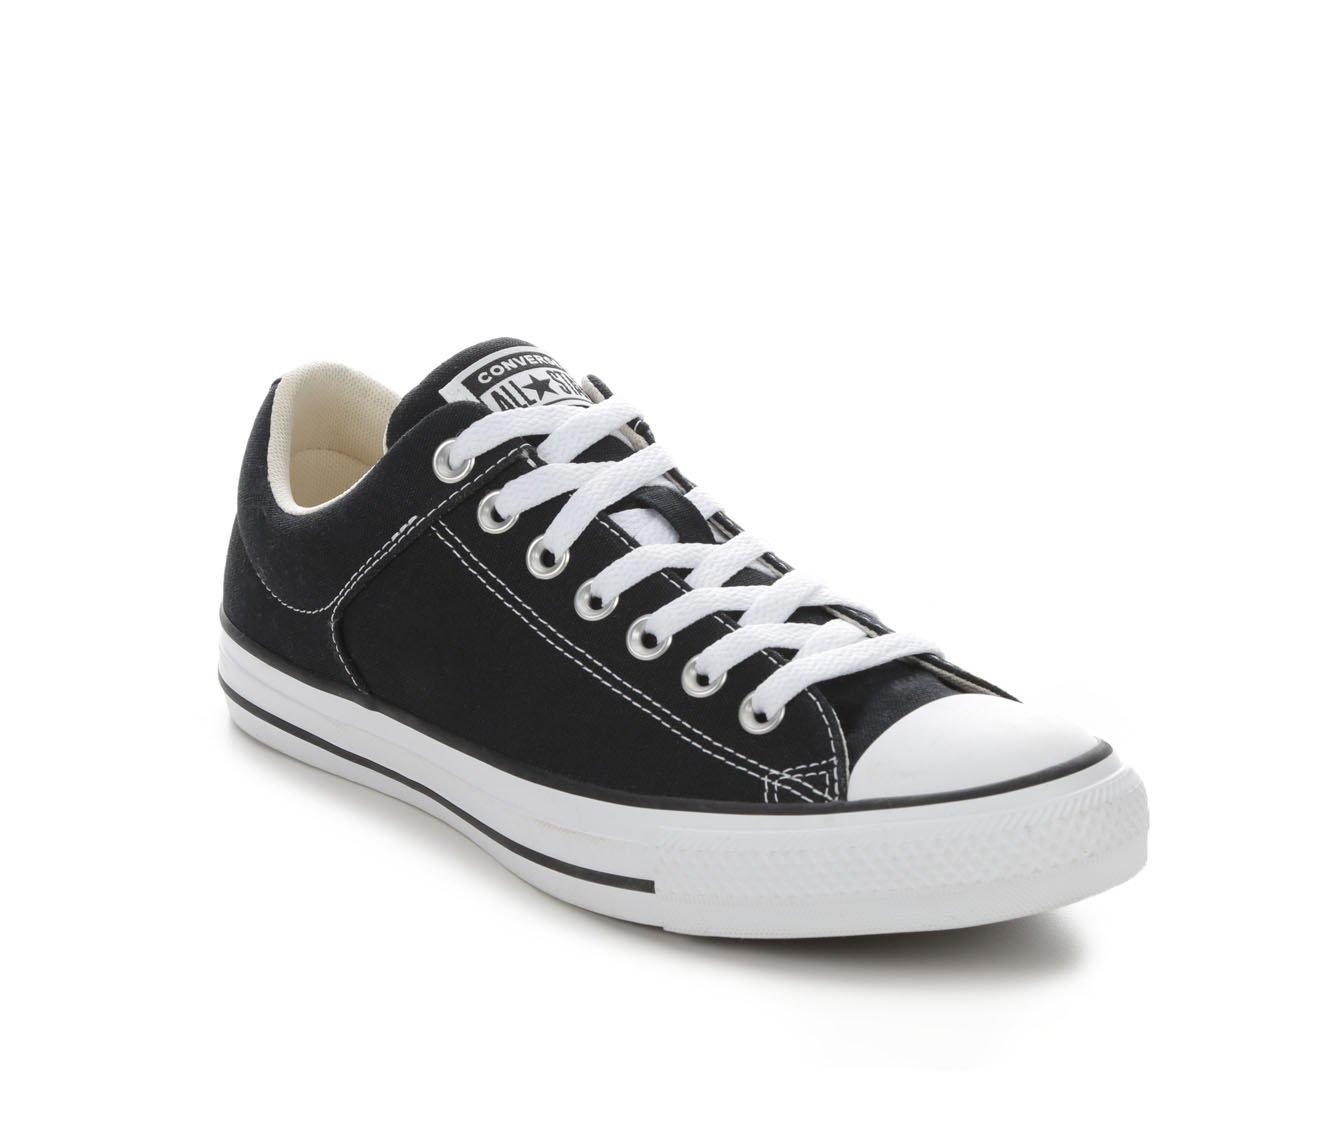 Men's Converse Chuck Taylor All Star Foundation Ox Sneakers | Shoe Carnival